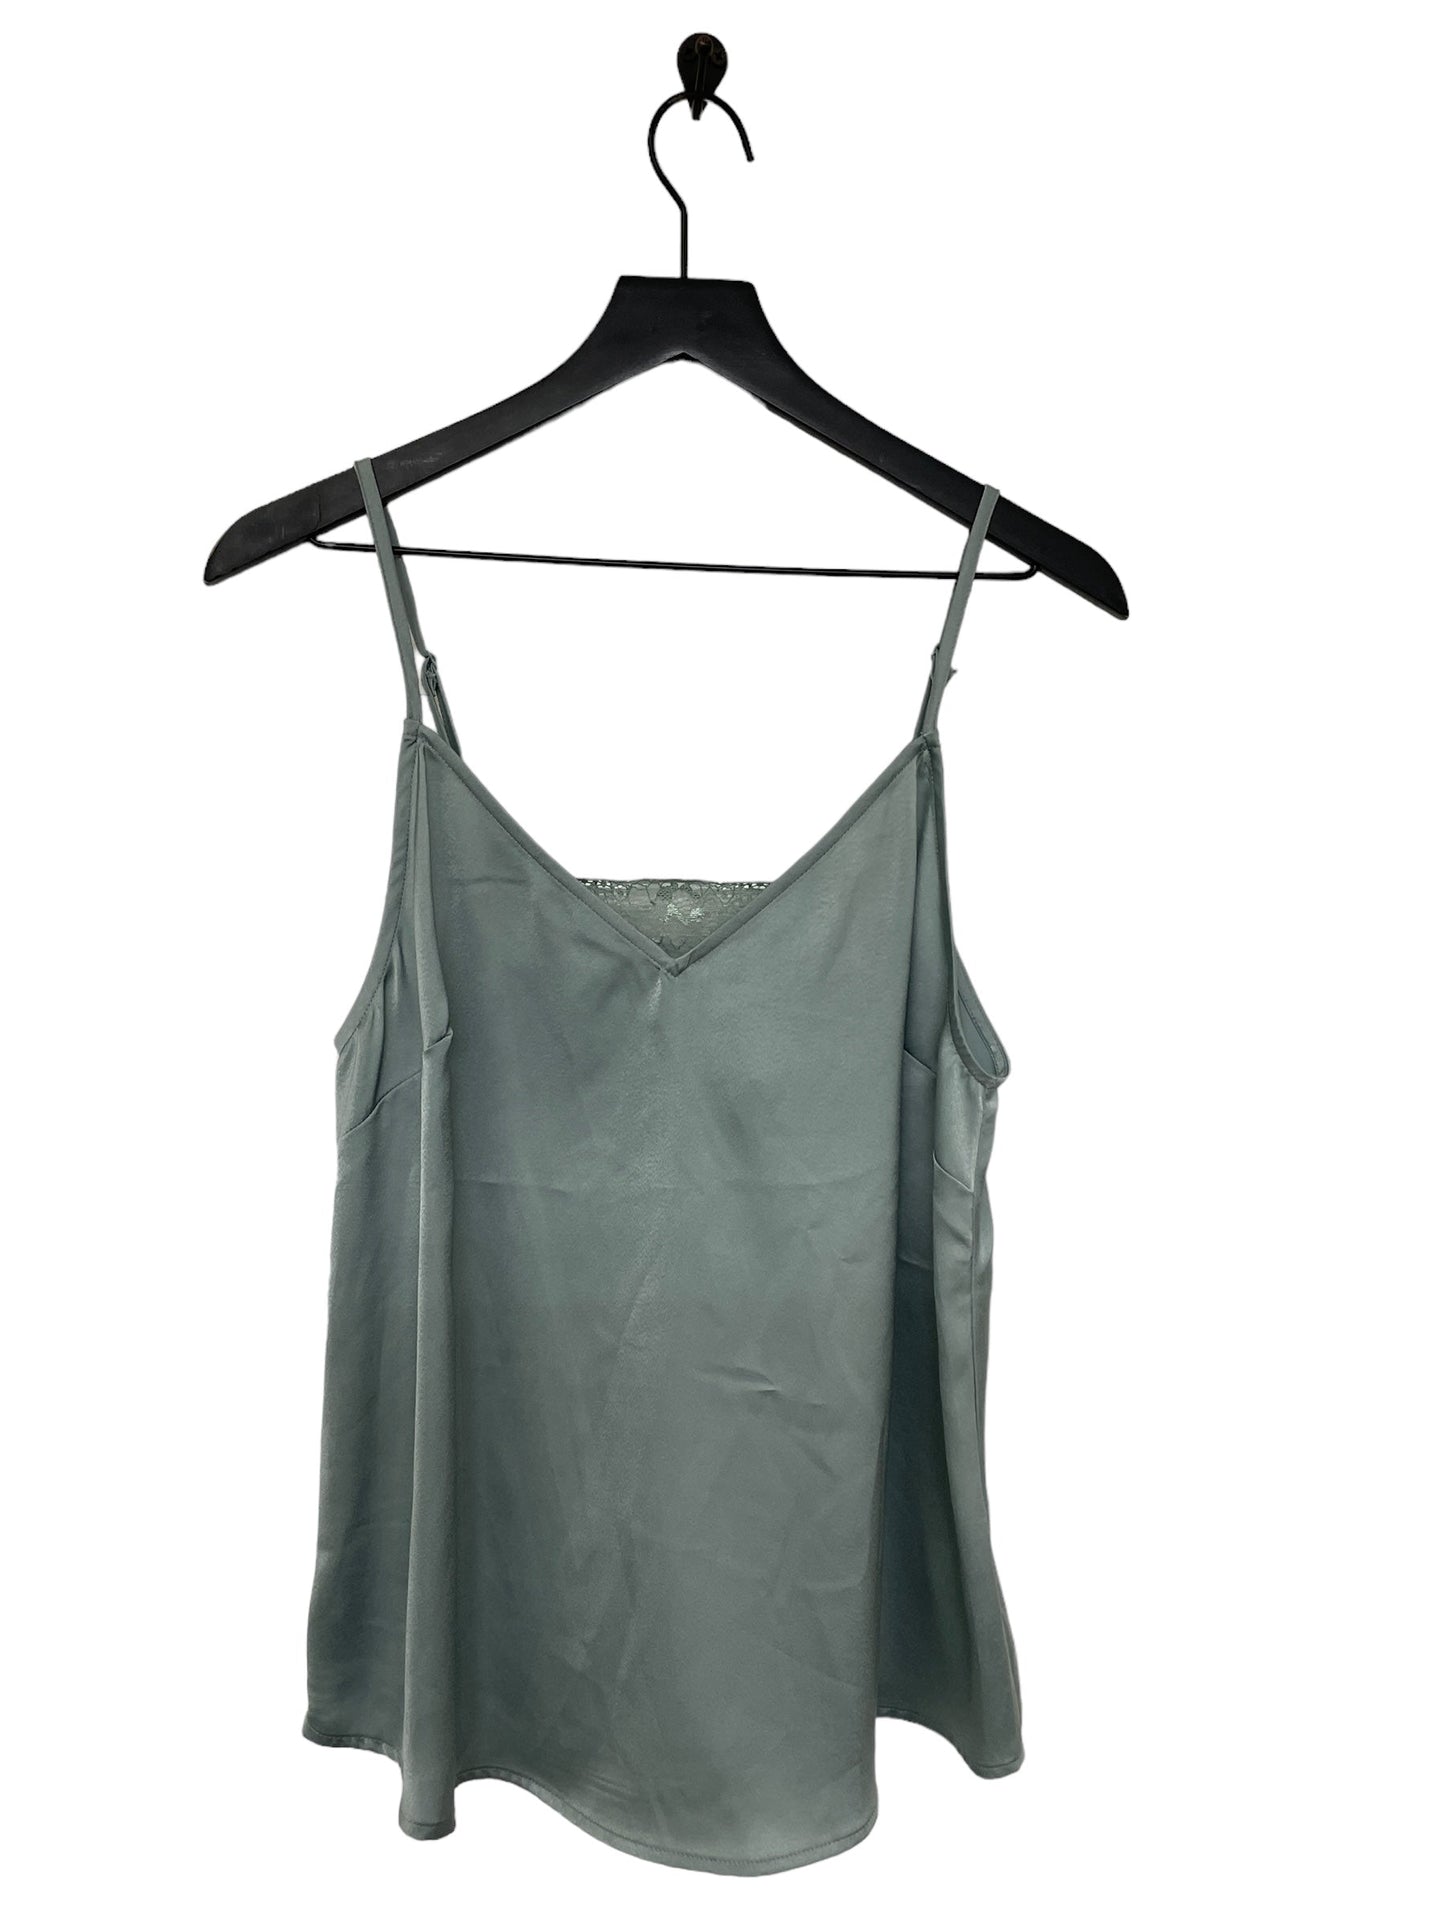 Blue Top Sleeveless The Nines, Size L